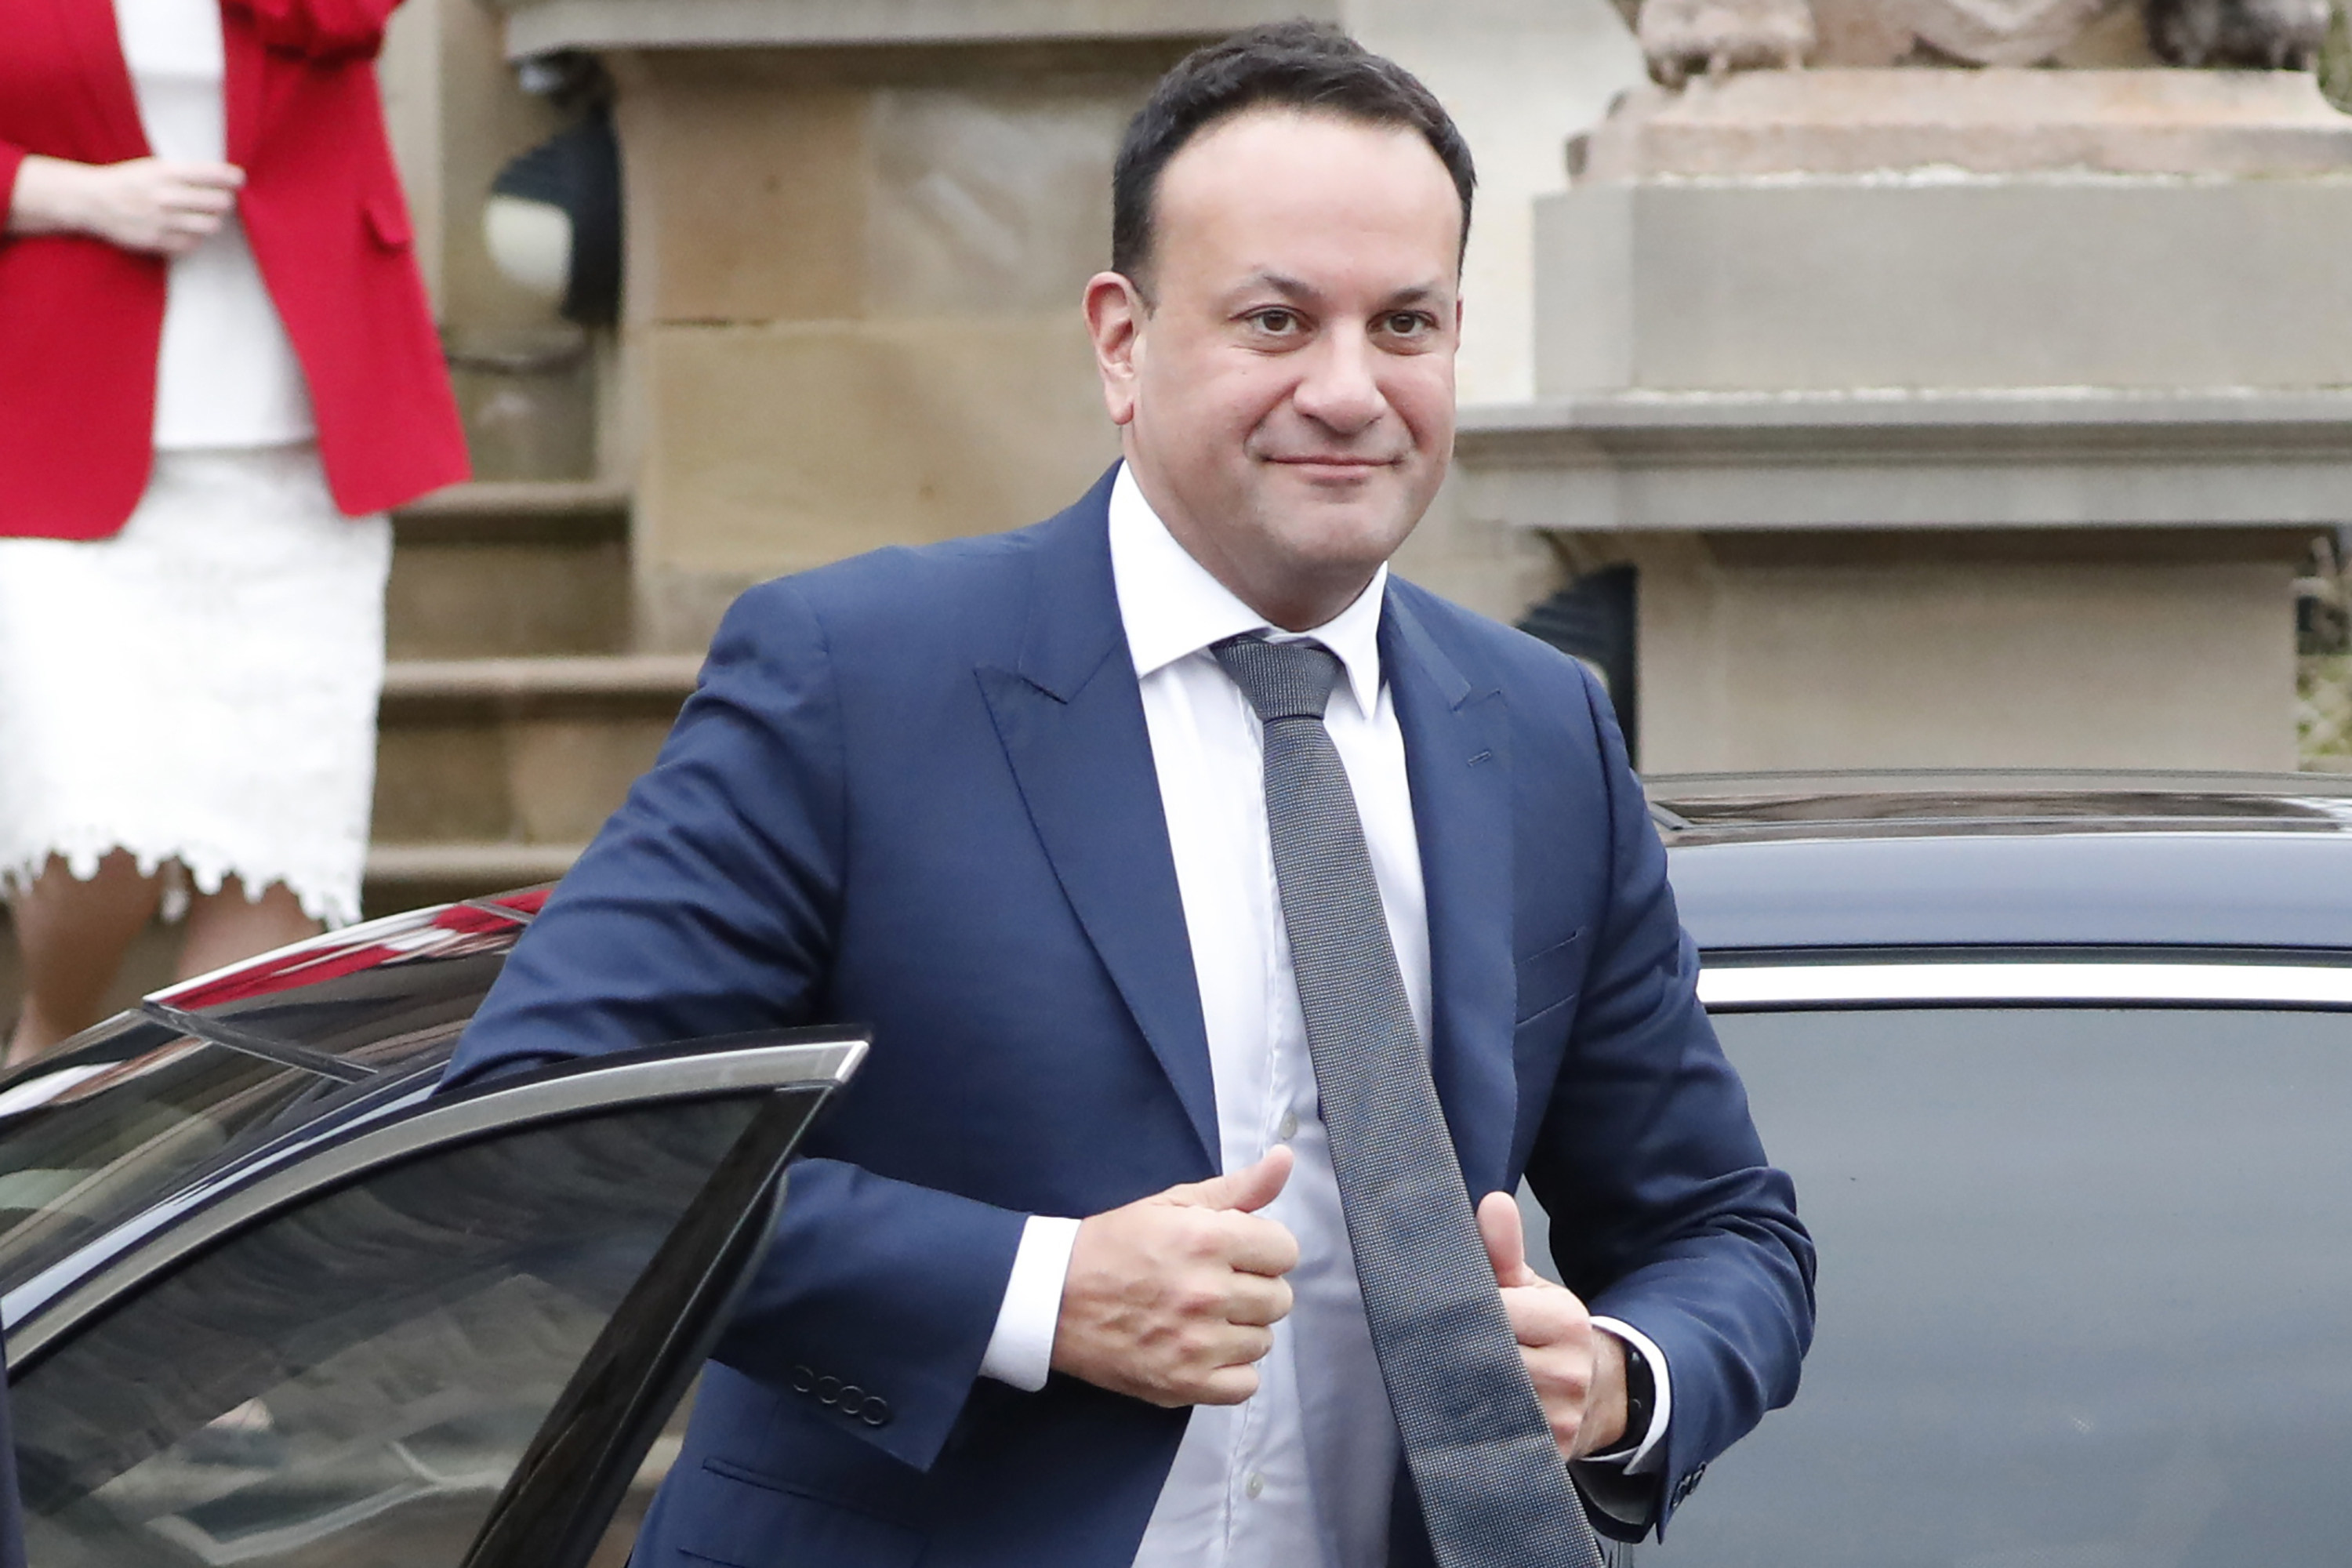 Irish Prime Minister Leo Varadkar will step down as leader of the country as soon as a successor is chosen. Varadkar announced Wednesday he is quitting immediately as head of Fine Gael party, part of Ireland’s coalition government. Photo: AP